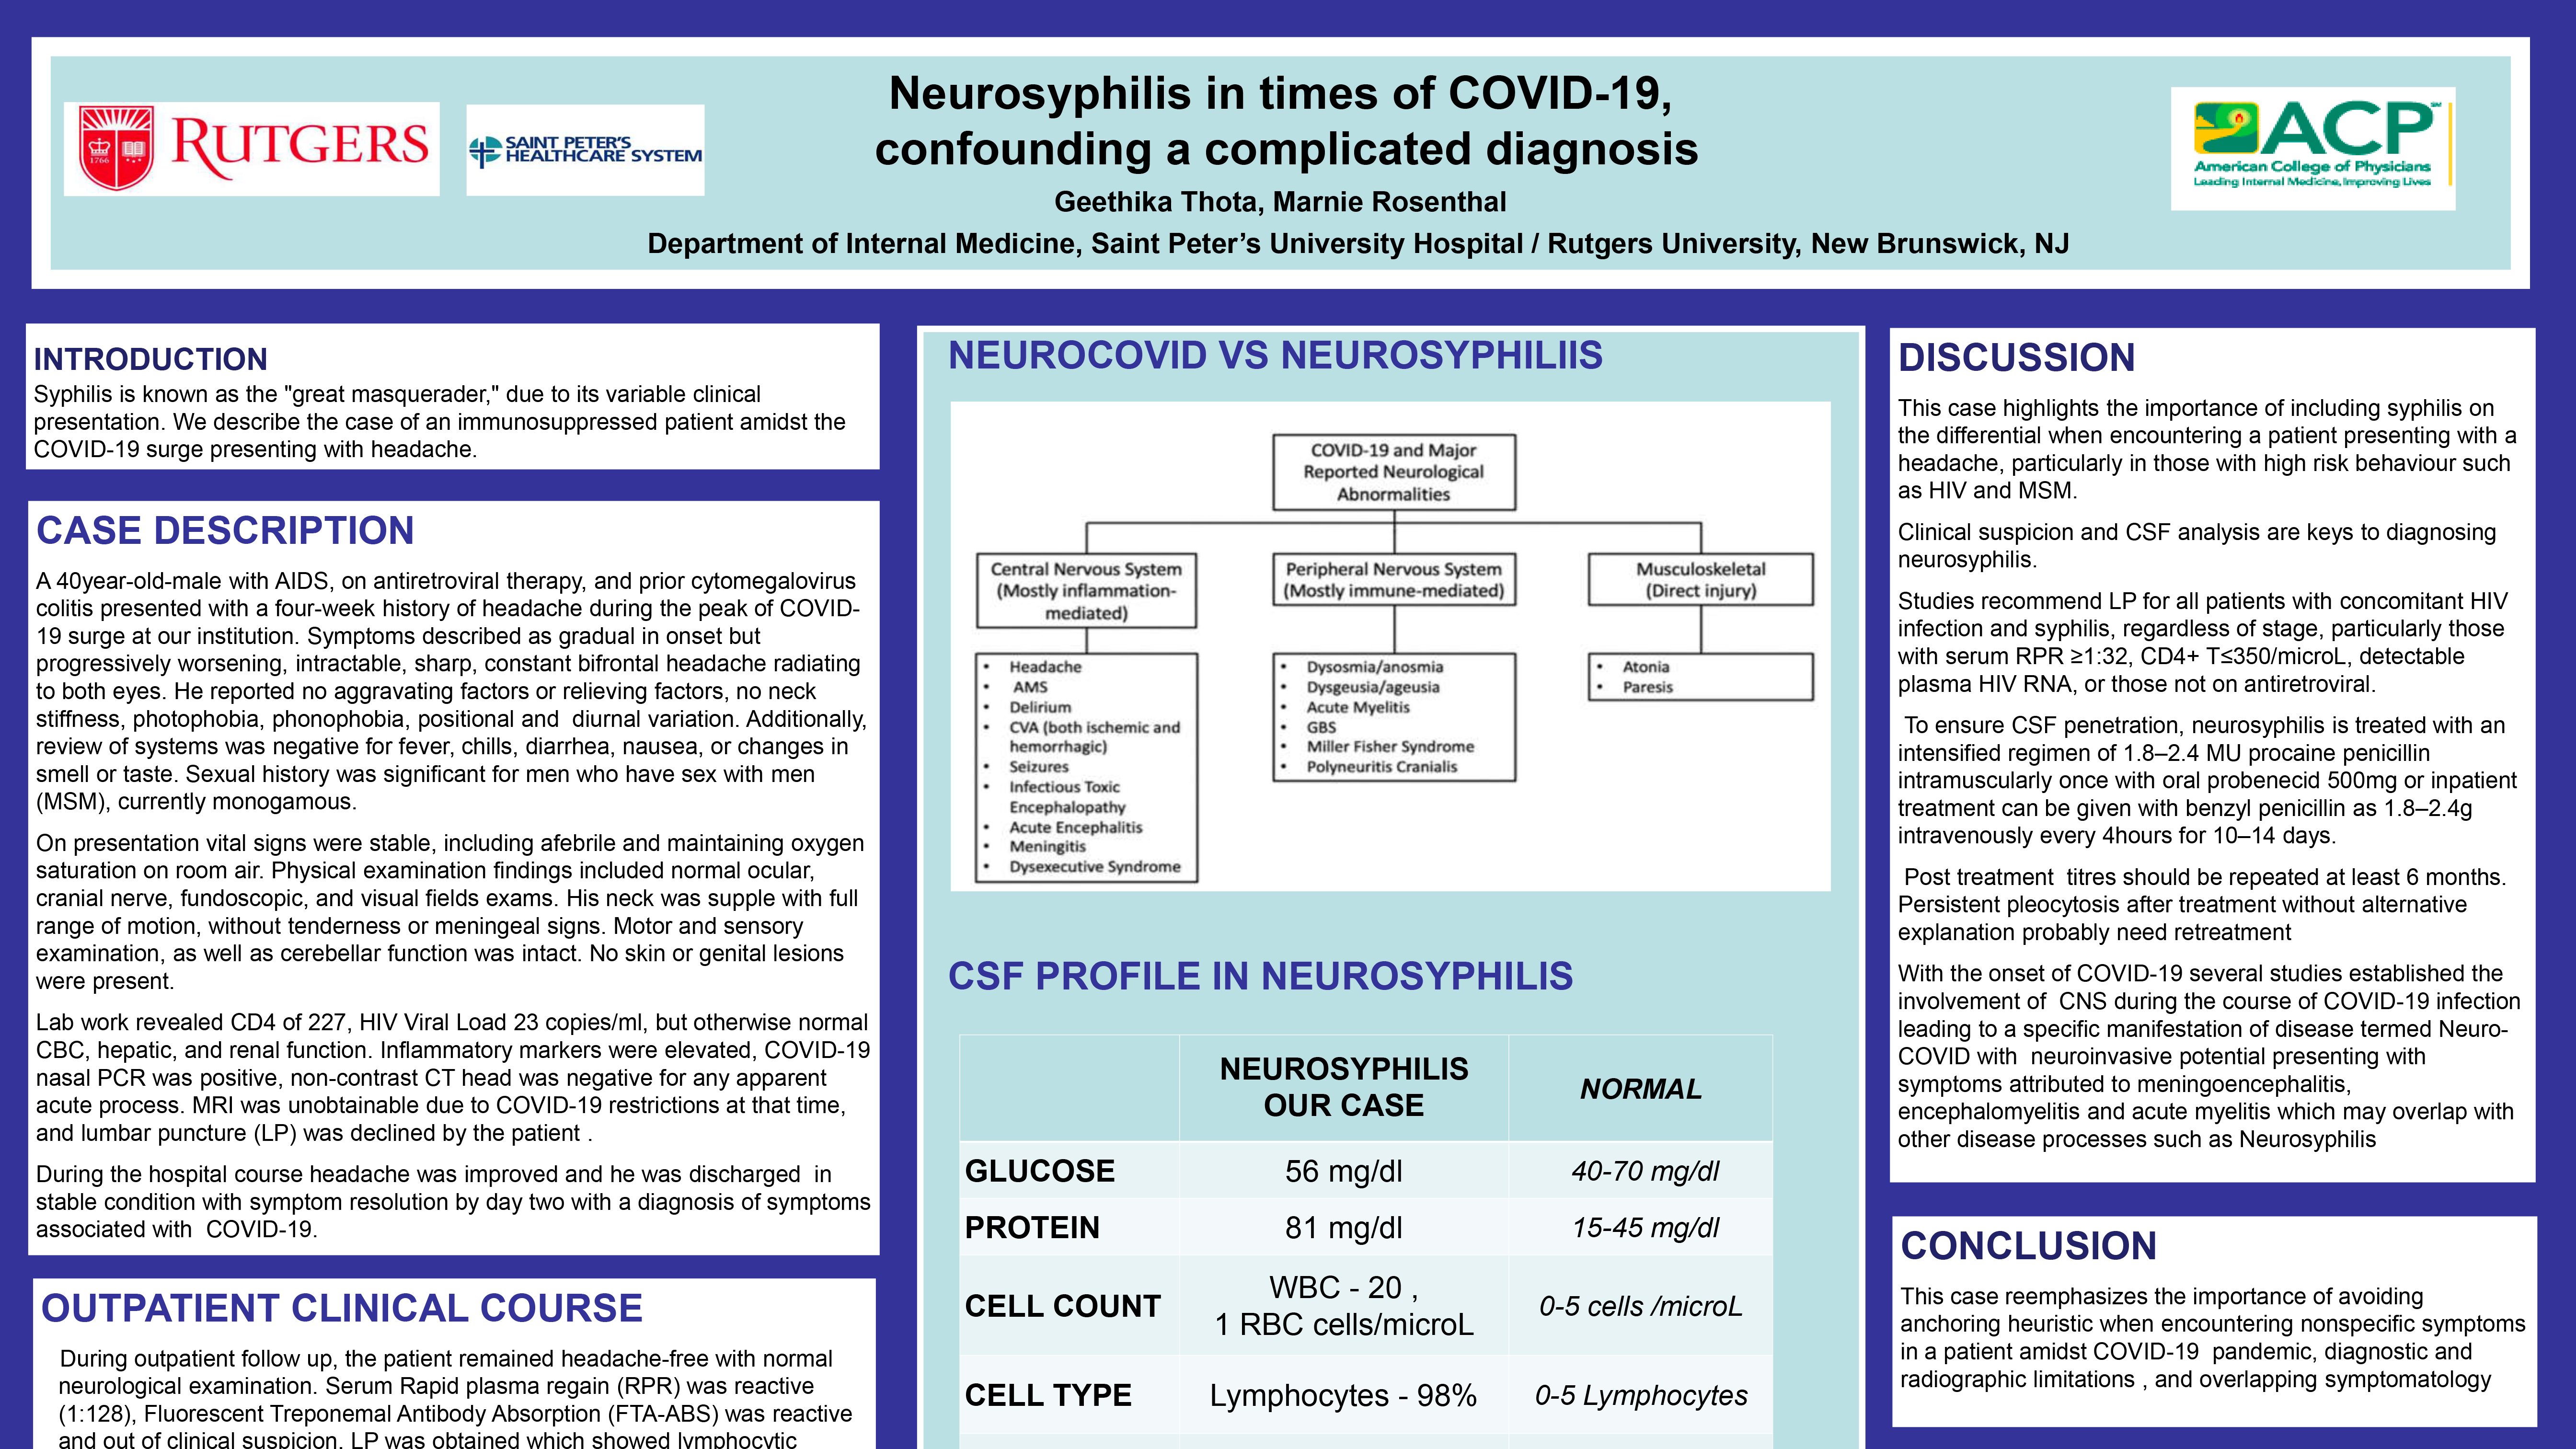 31-CV-129-Neurosyphilis in Times of COVID-19,Confounding a Complicated Diagnosis (5)